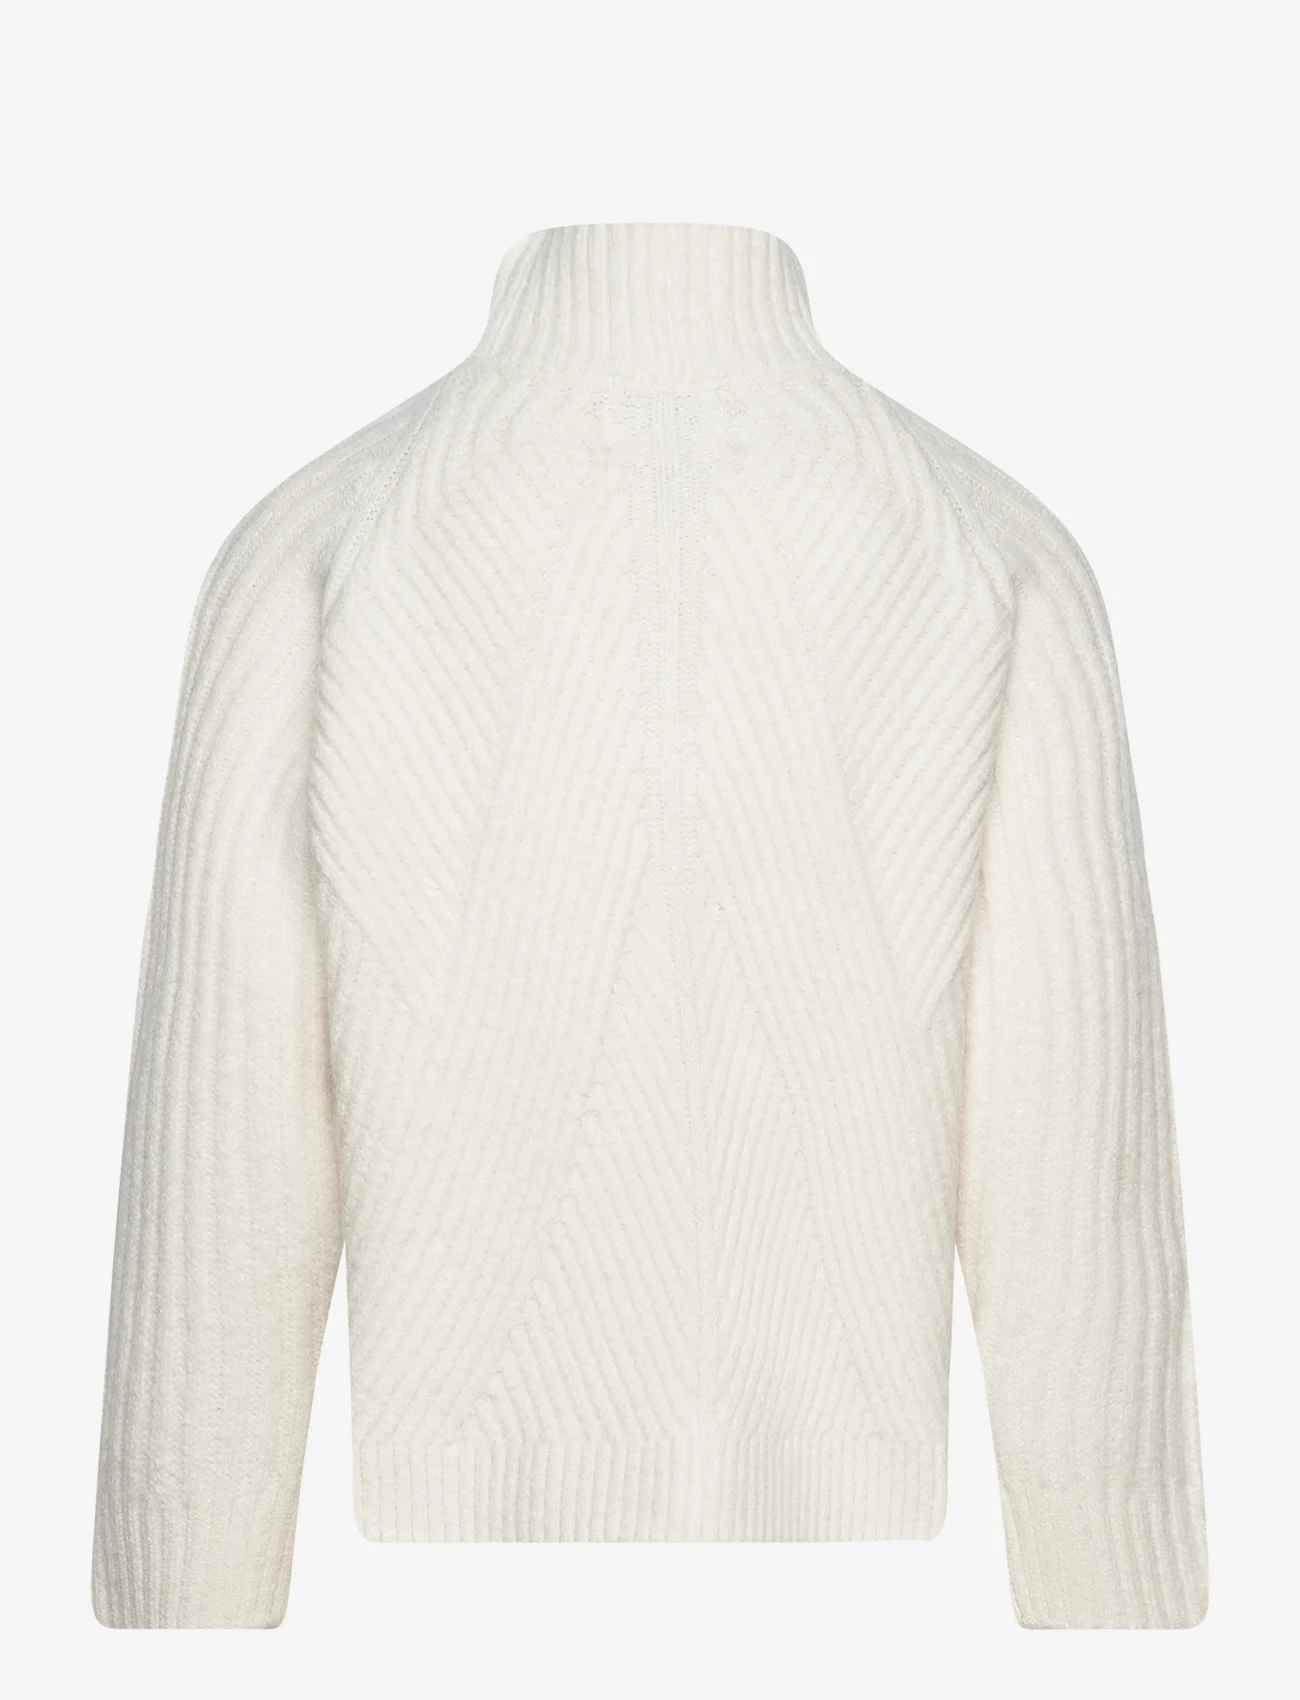 Sofie Schnoor Young - Sweater - jumpers - off white - 1